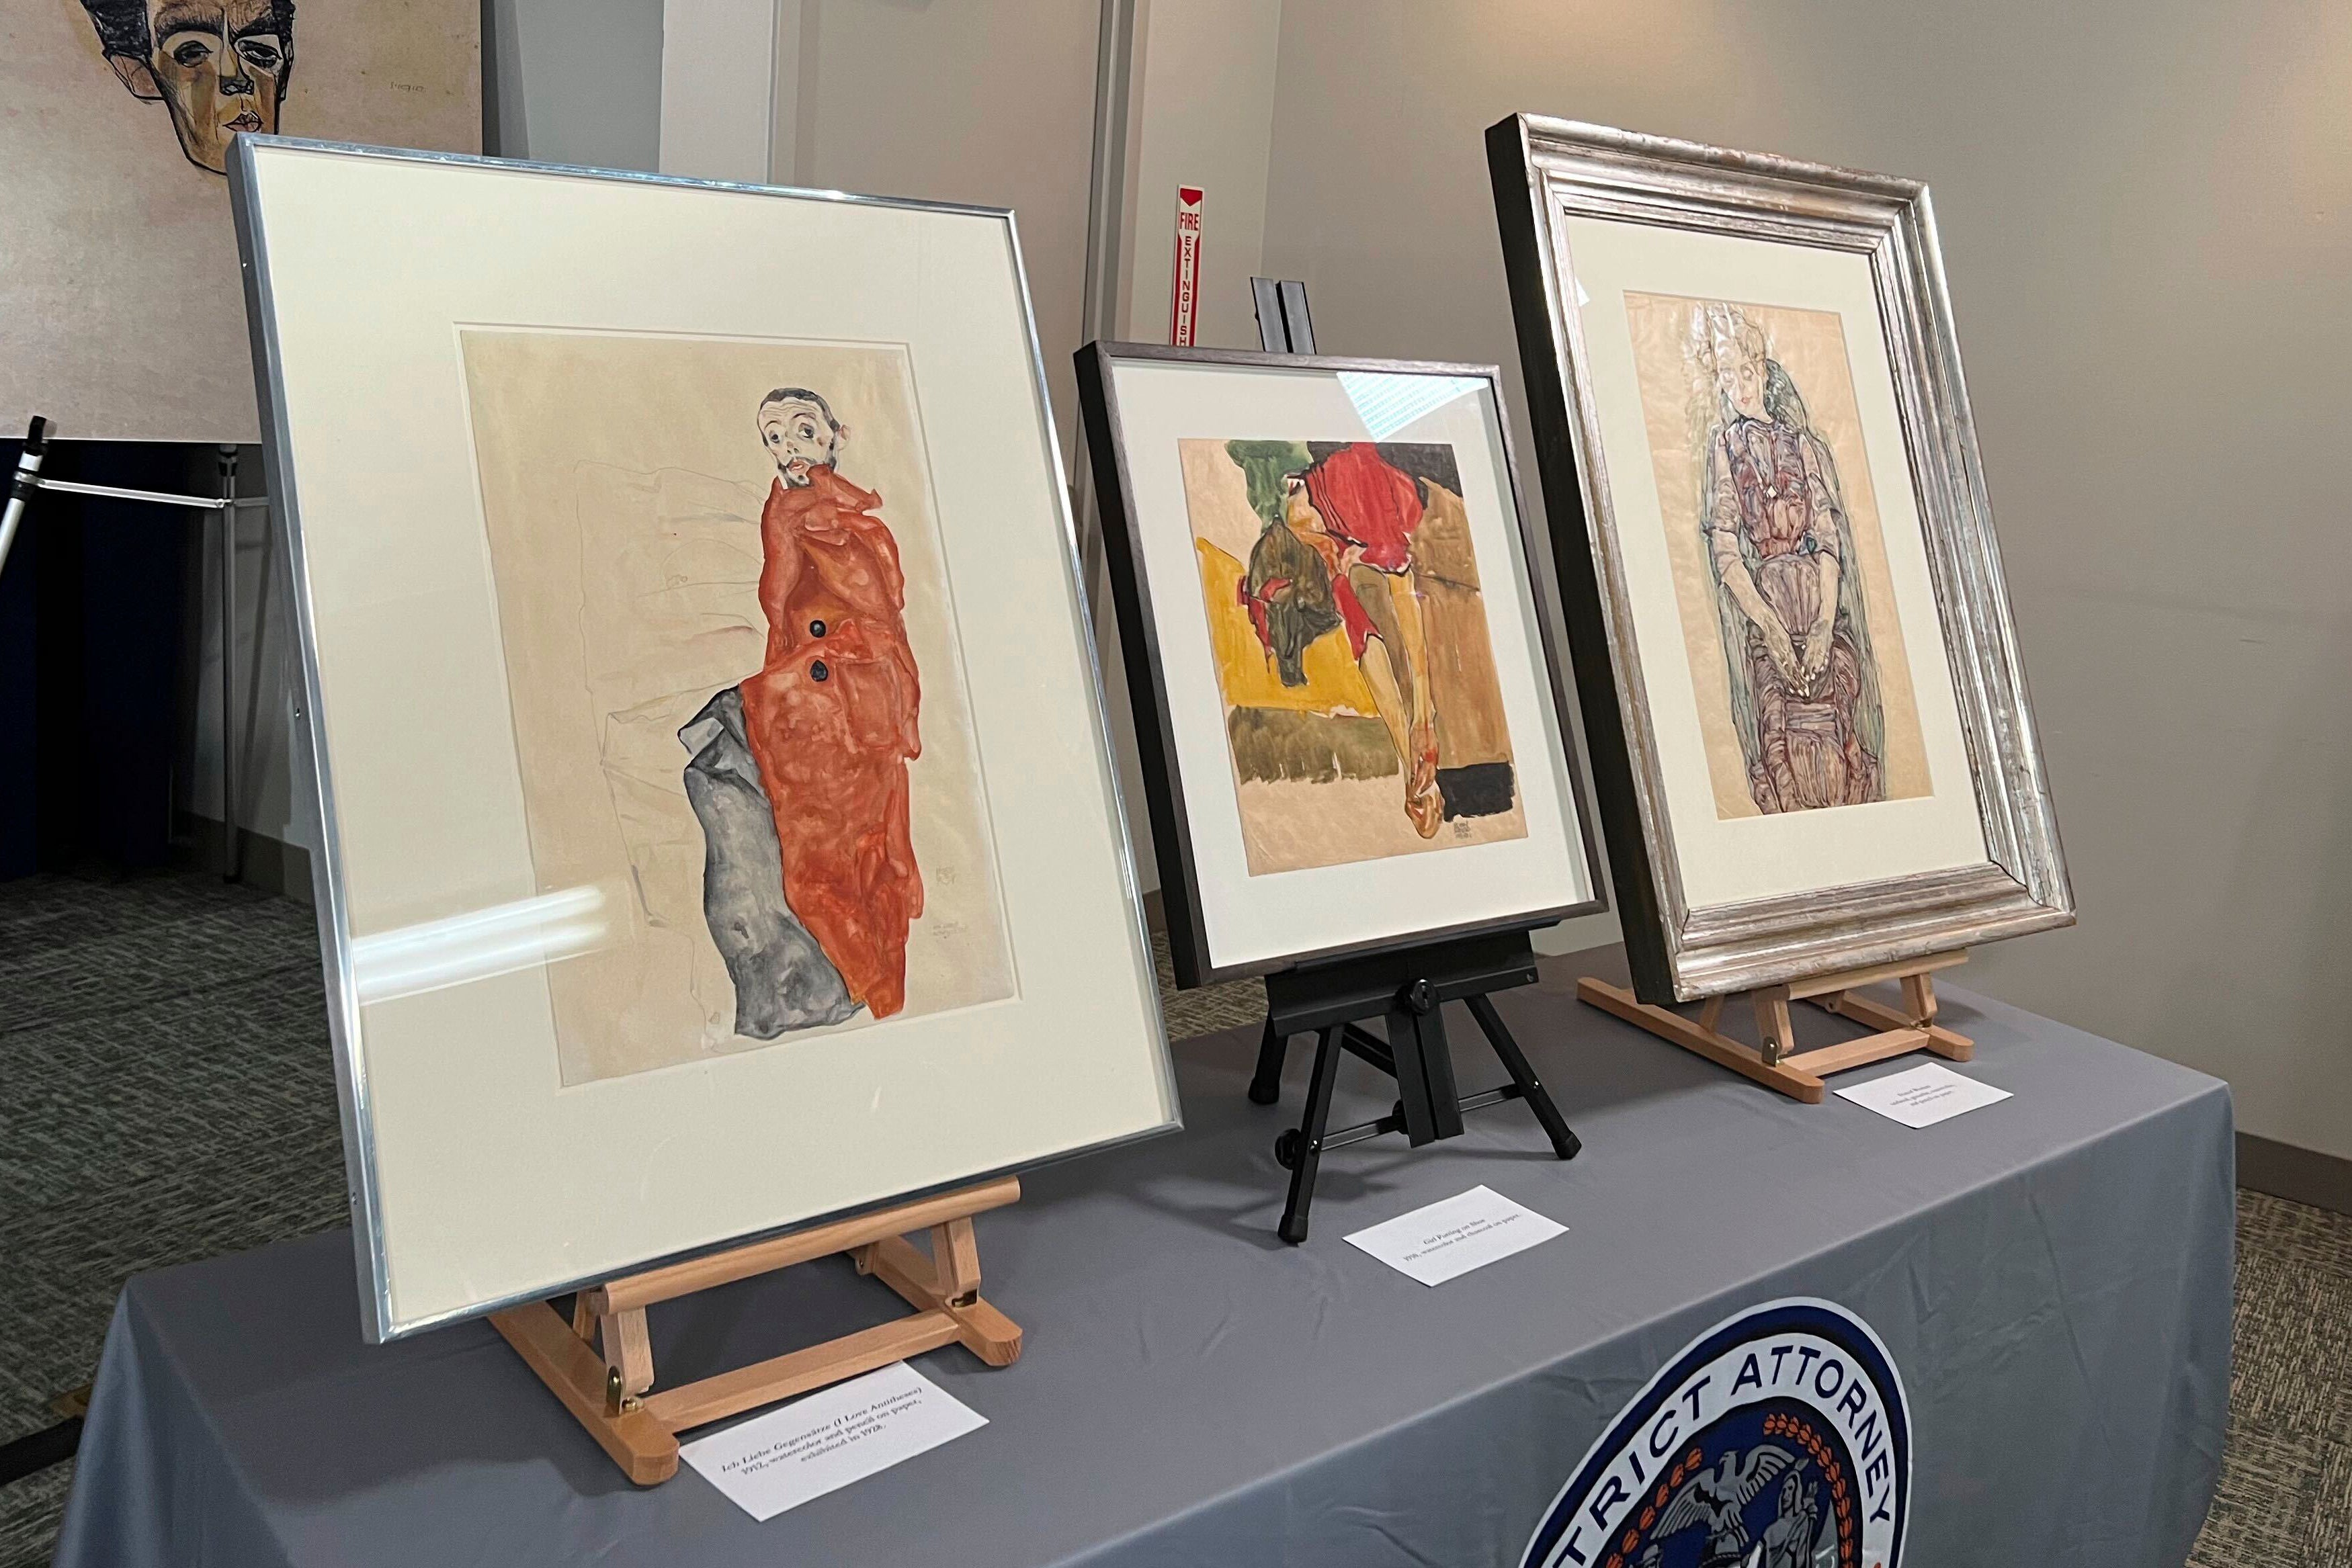 Works of art by Austrian expressionist artist Egon Schiele are on display at the Manhattan District Attorney's Office